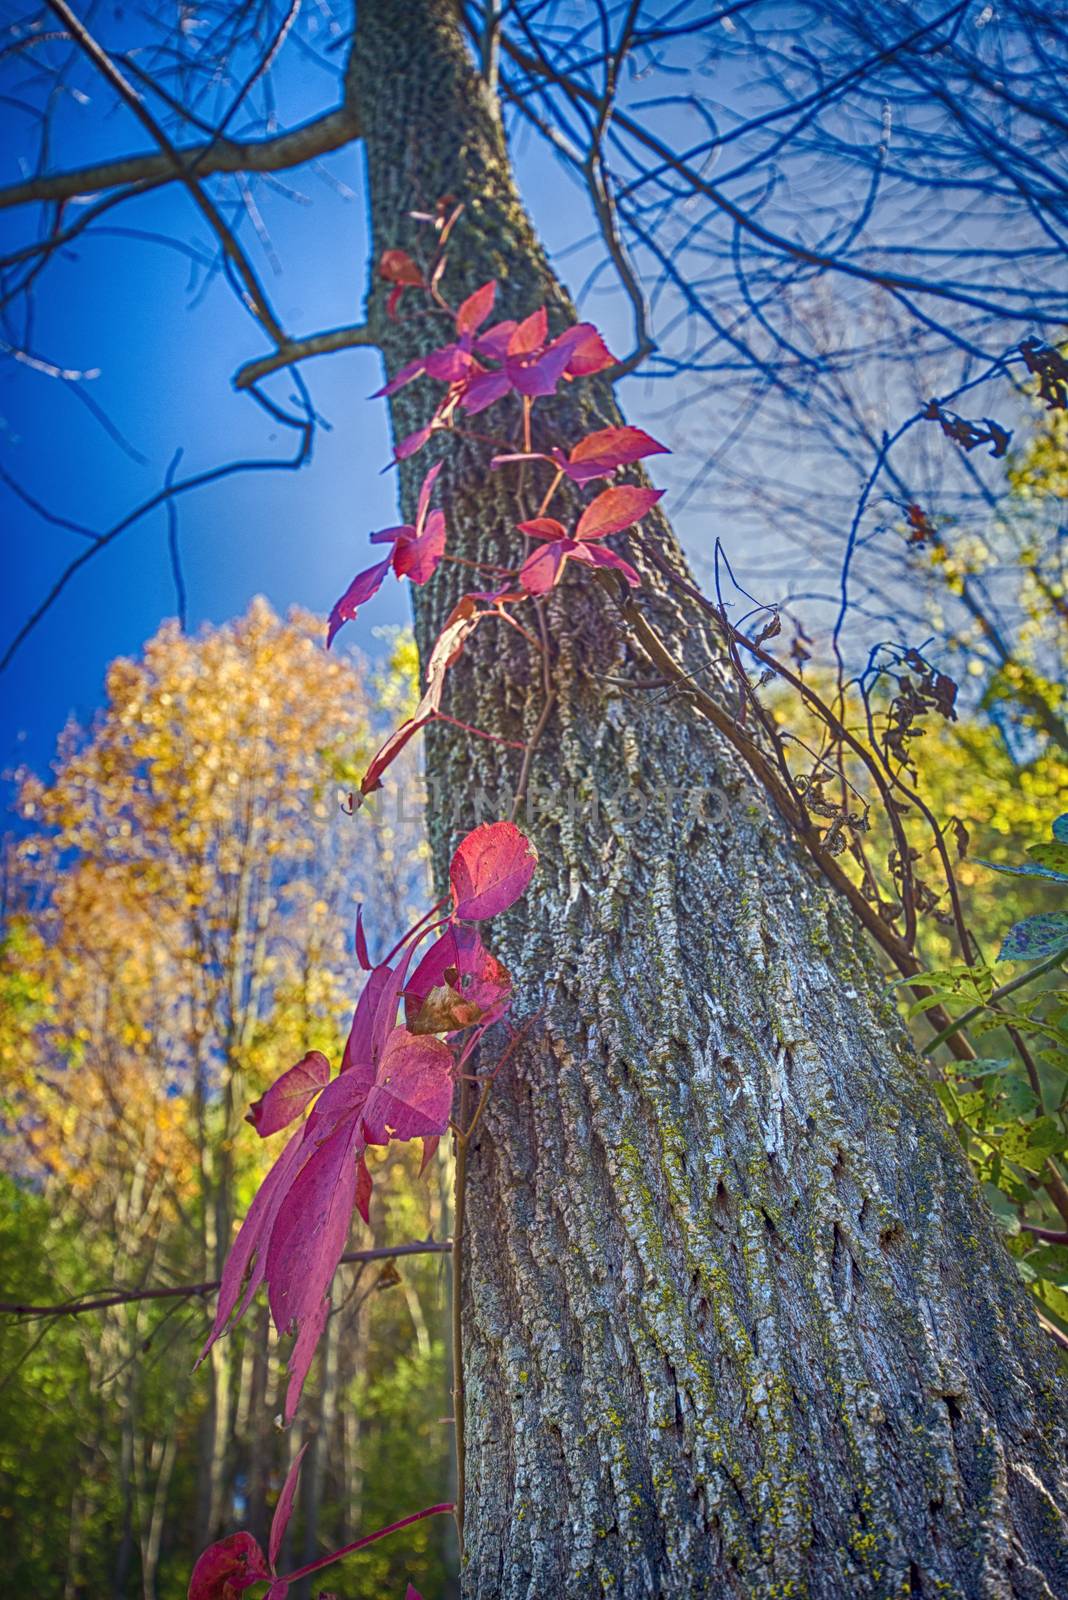 Colorful fall view with trunk and red vine plant against blue sky, Dundas conservation area, Ontario, Canada.